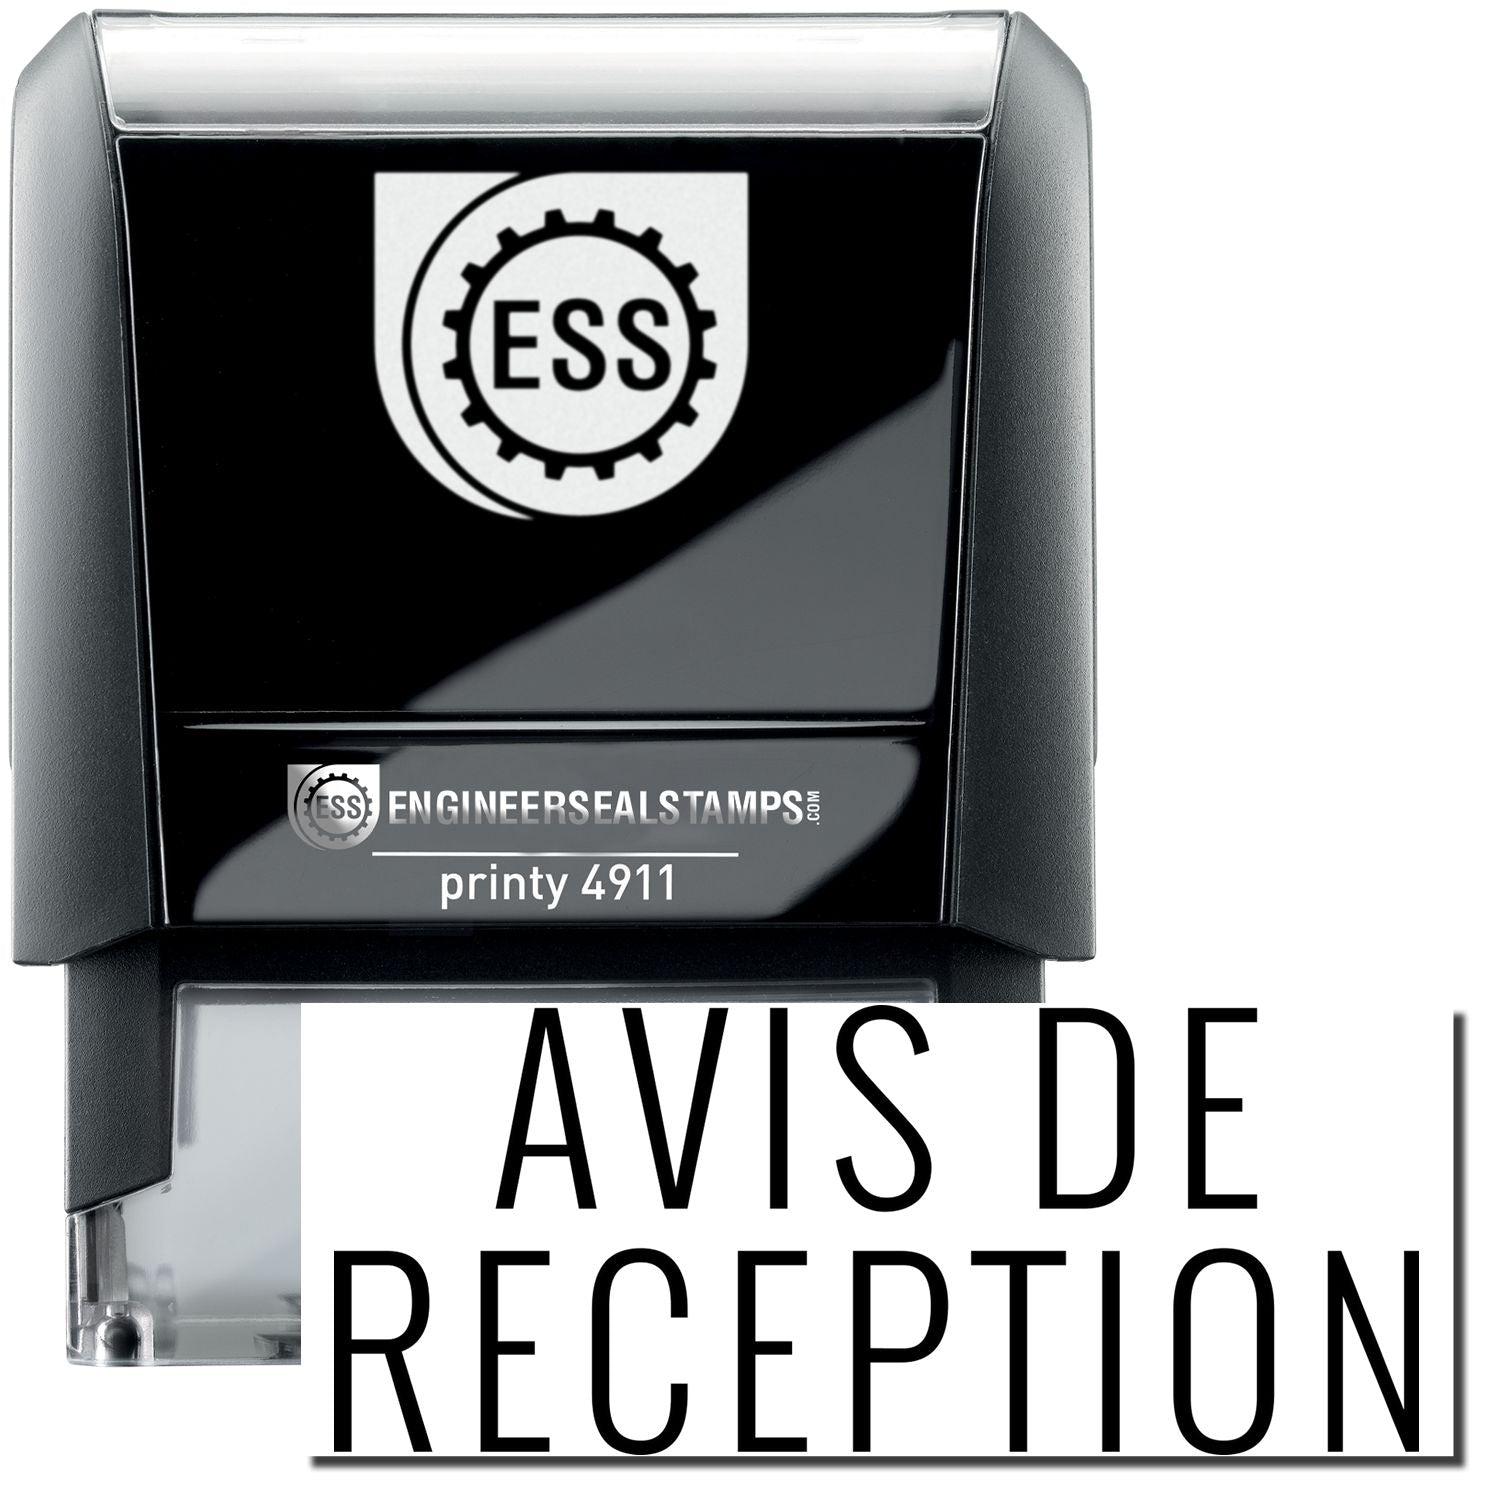 A self-inking stamp with a stamped image showing how the text "AVIS DE RECEPTION" is displayed after stamping.